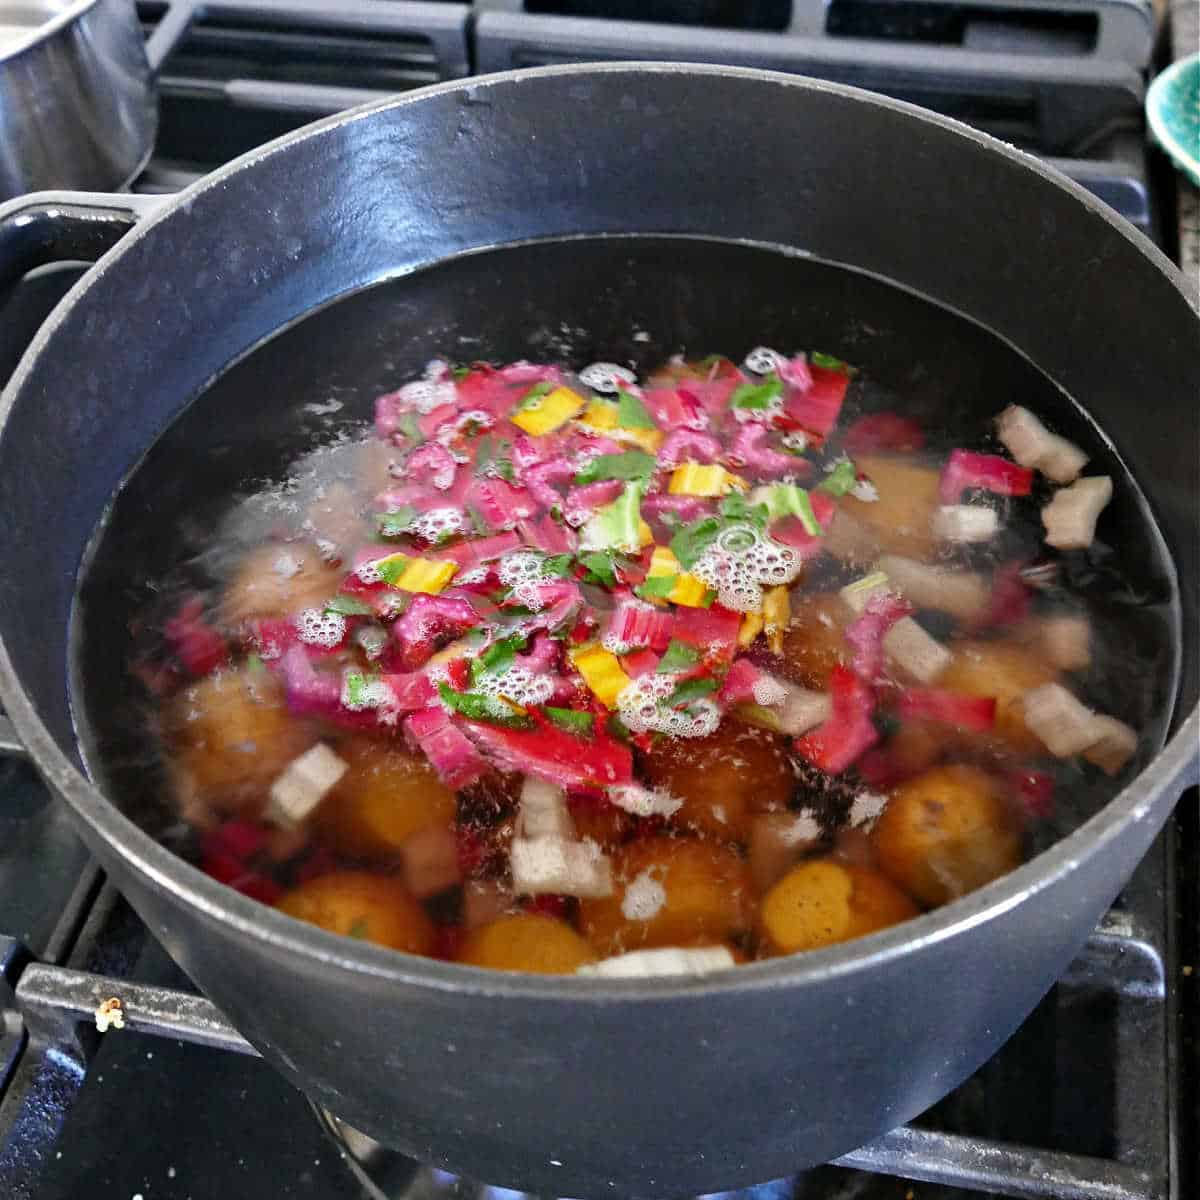 potatoes and chard stems cooking in a pot of boiling water on the stove